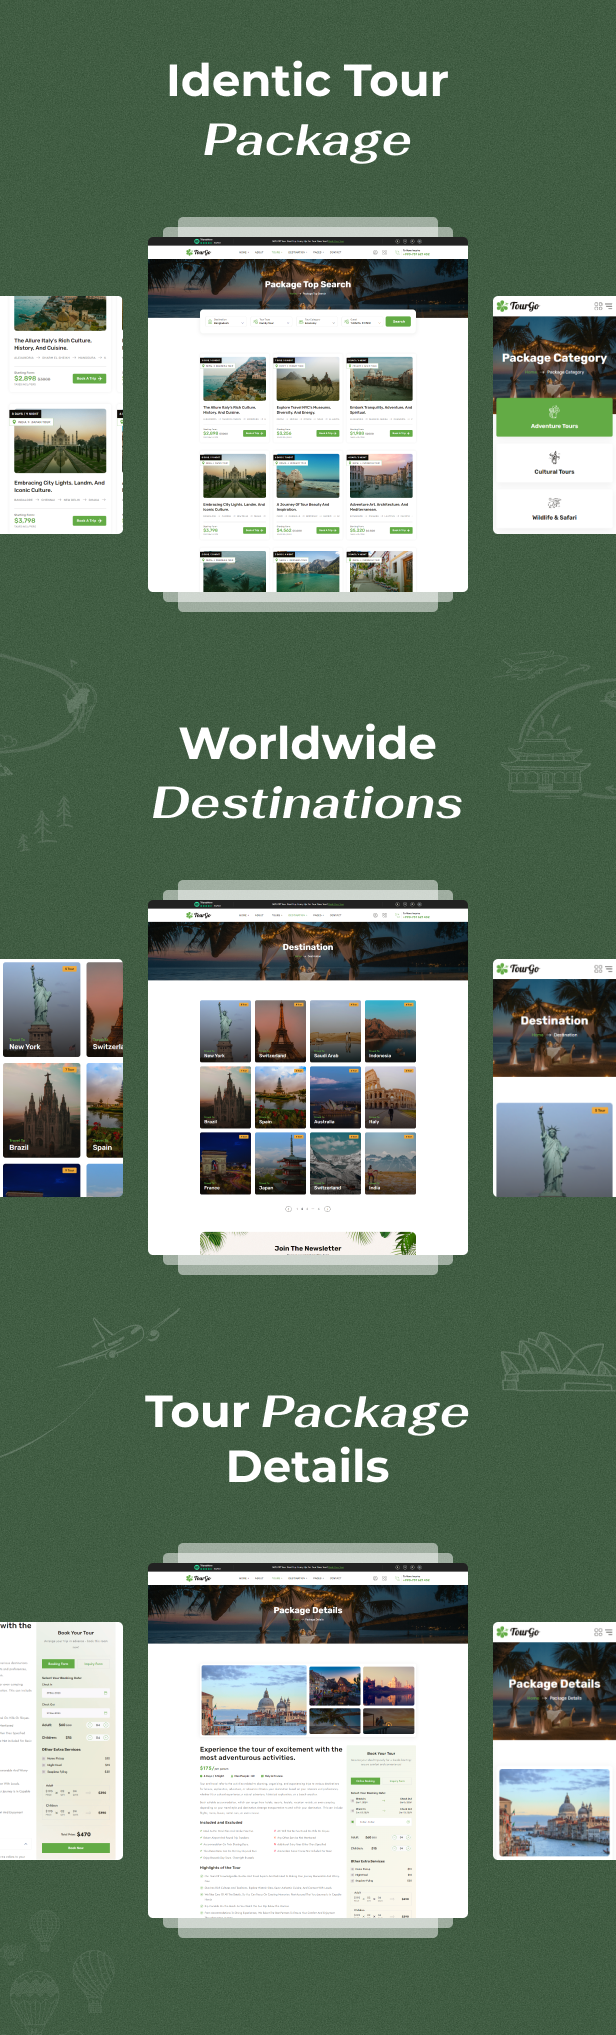 TripRex - Travel Agency and Tour Booking Template - 2